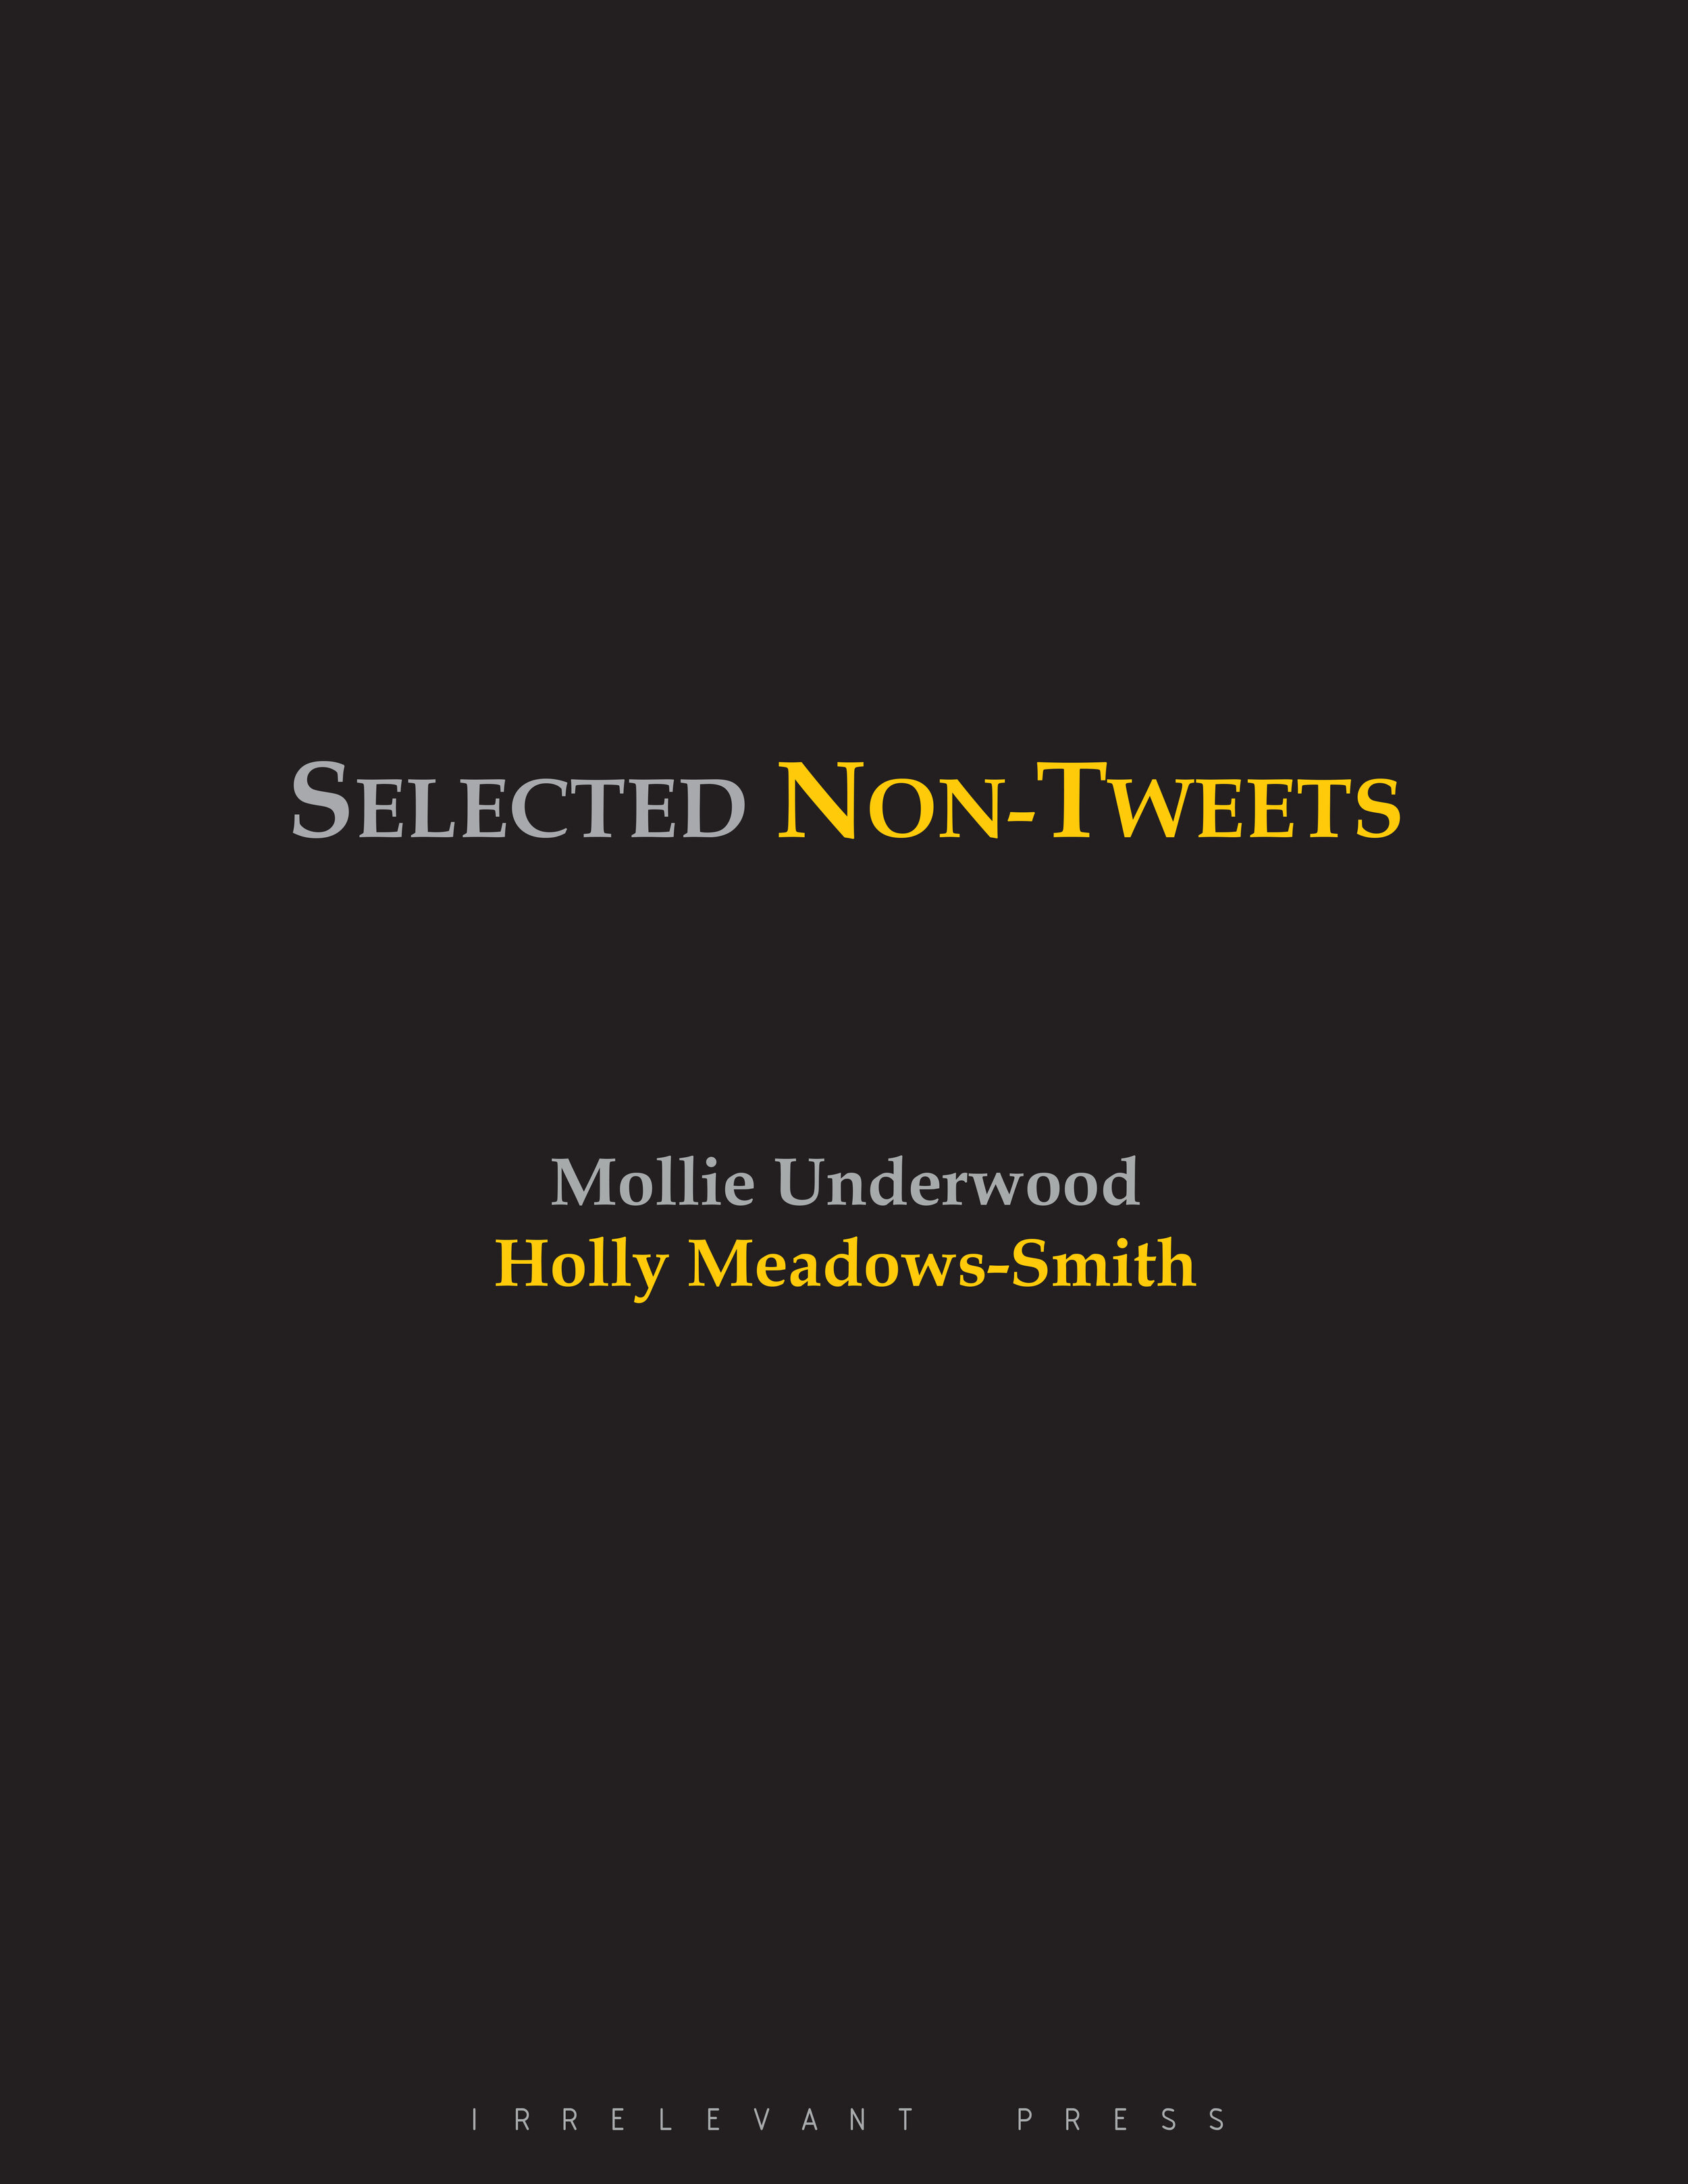 Selected Non-Tweets by Holly Meadows-Smith &amp; Mollie Underwood